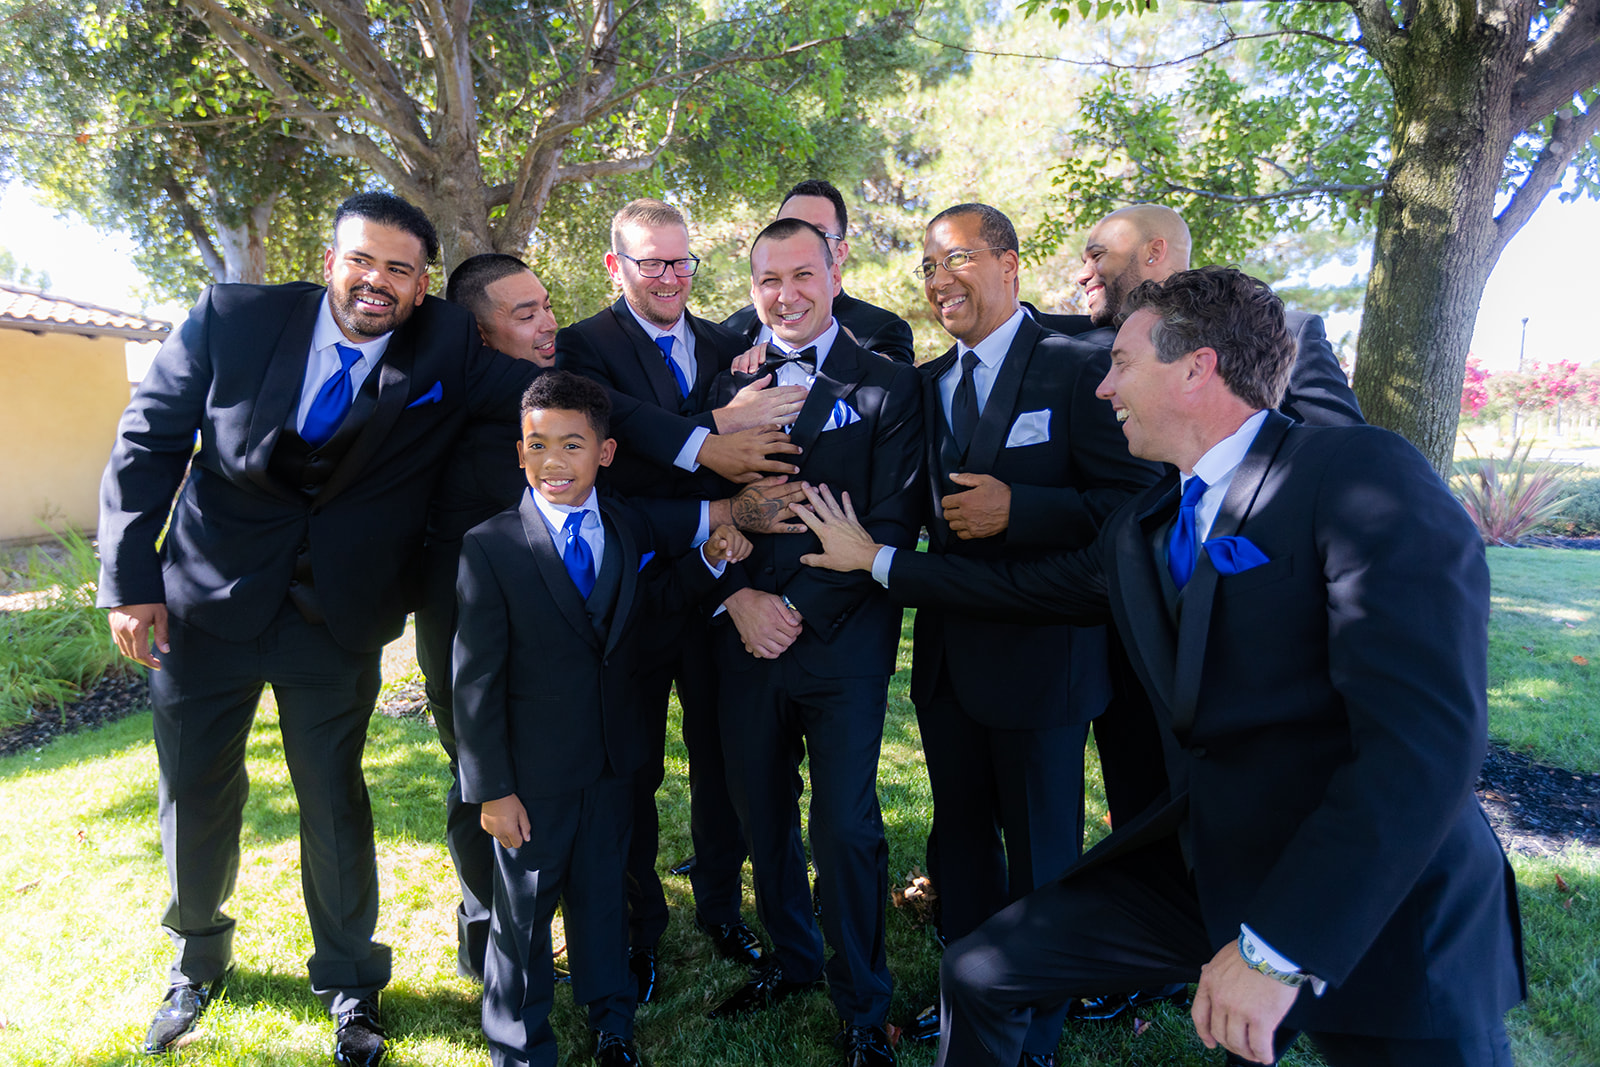 a groom with his groomsmen being funny without a first look